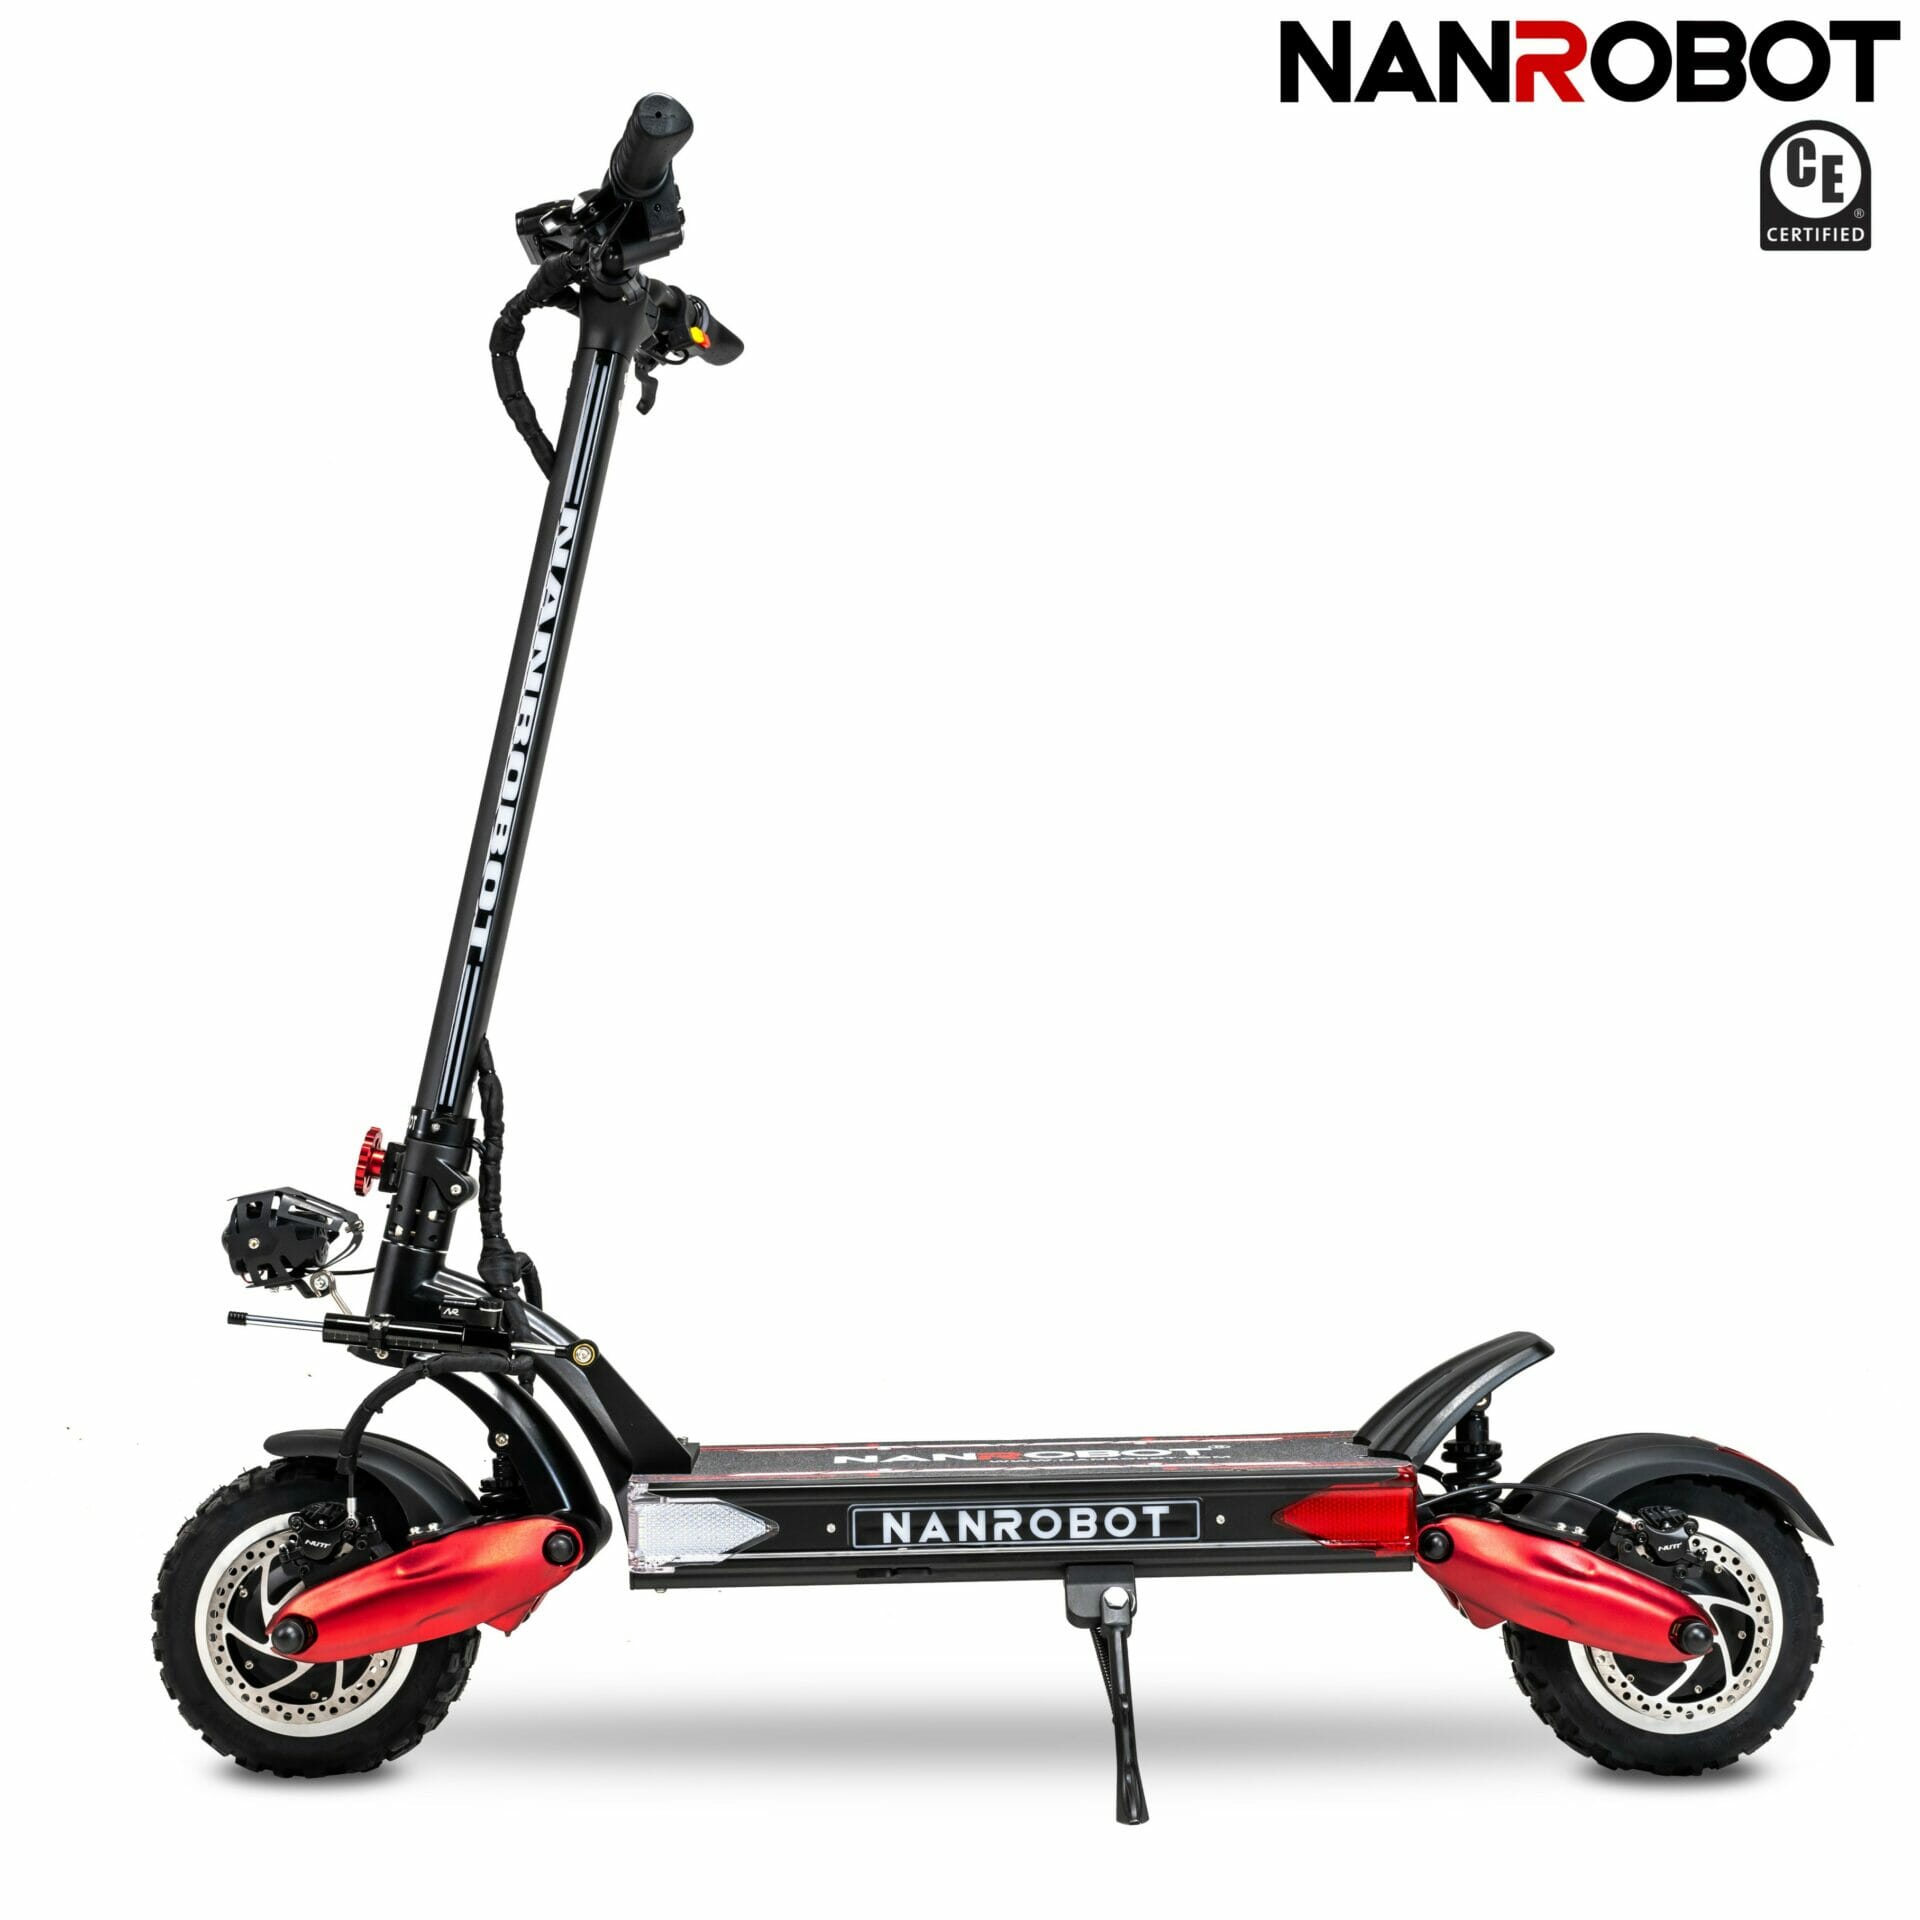 Nanrobot Ls7+plus Electric Scooter Overview